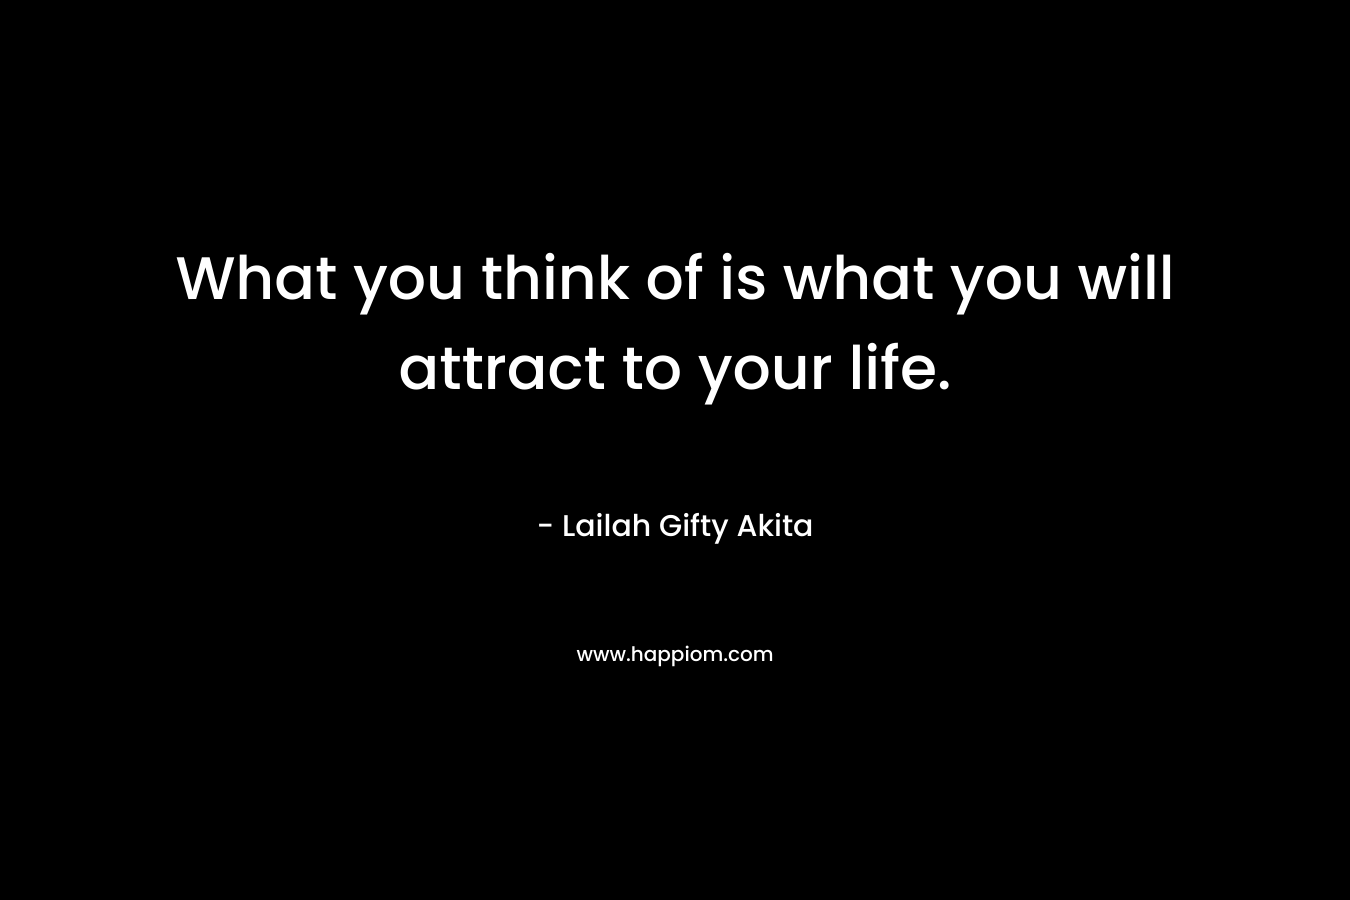 What you think of is what you will attract to your life.